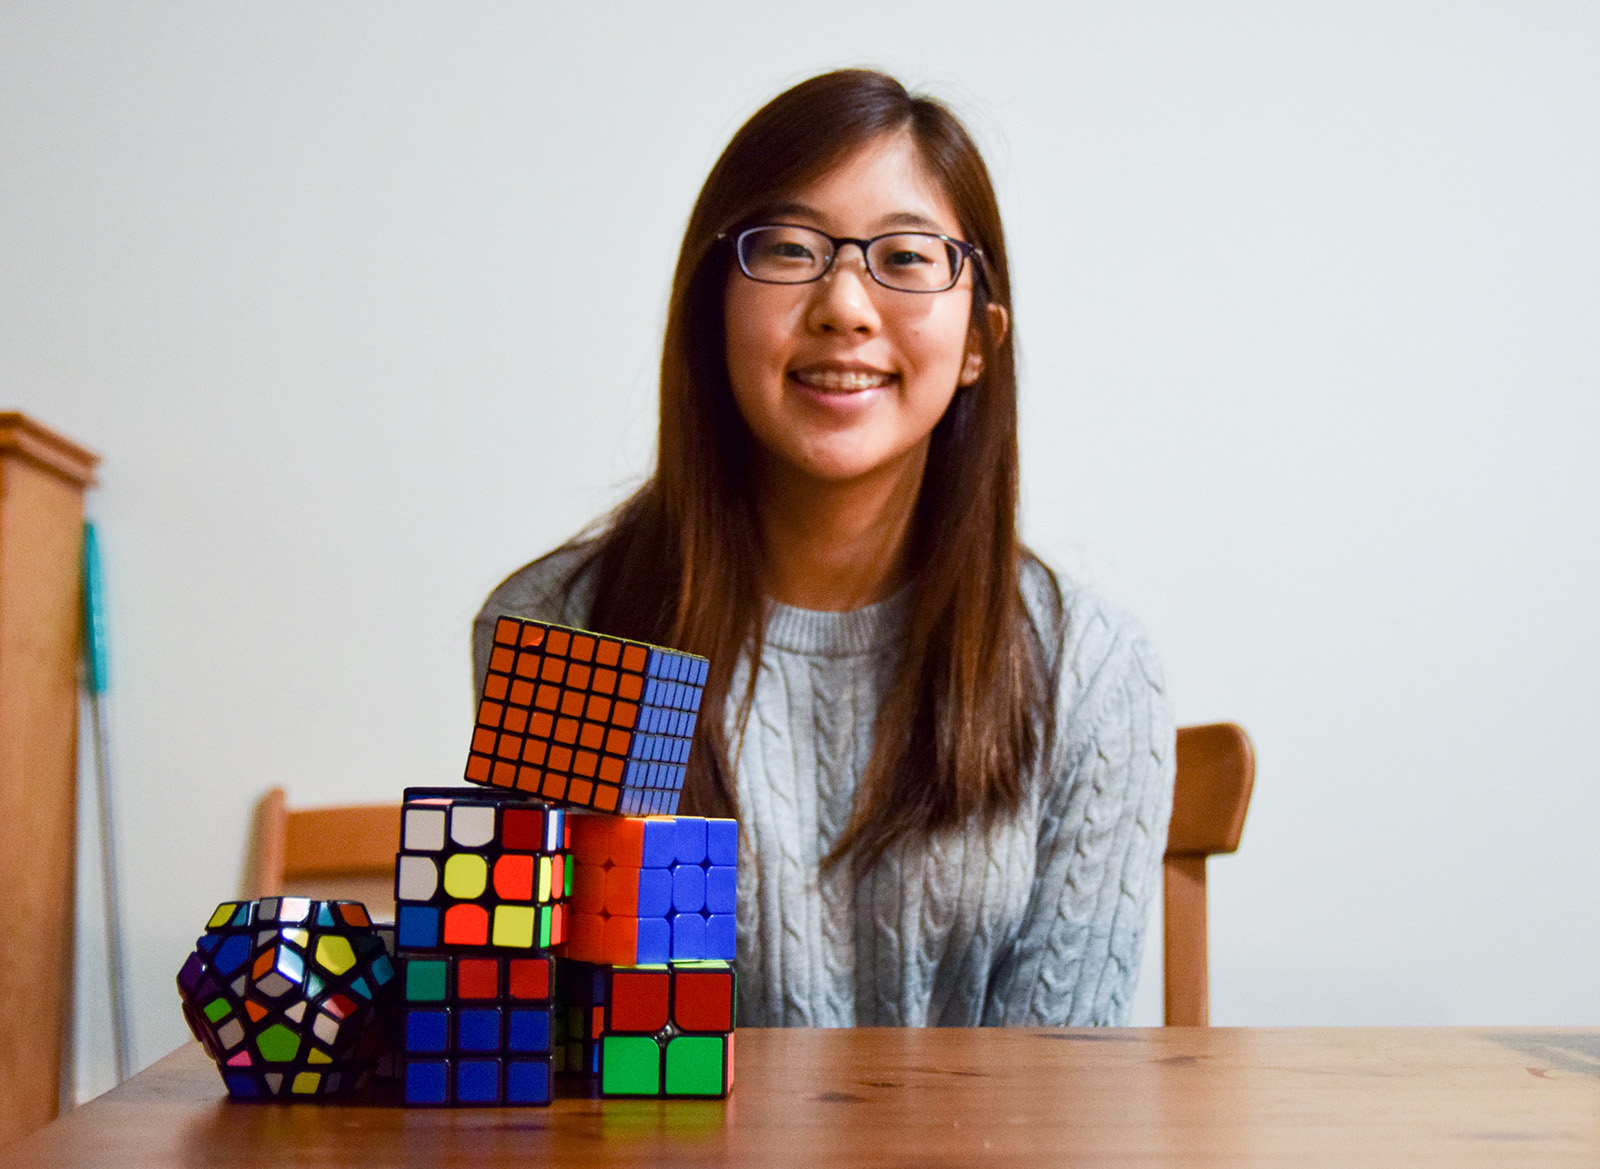 Cubing Club at UCLA puzzles over Rubik's Cubes, builds cuber community - Daily Bruin